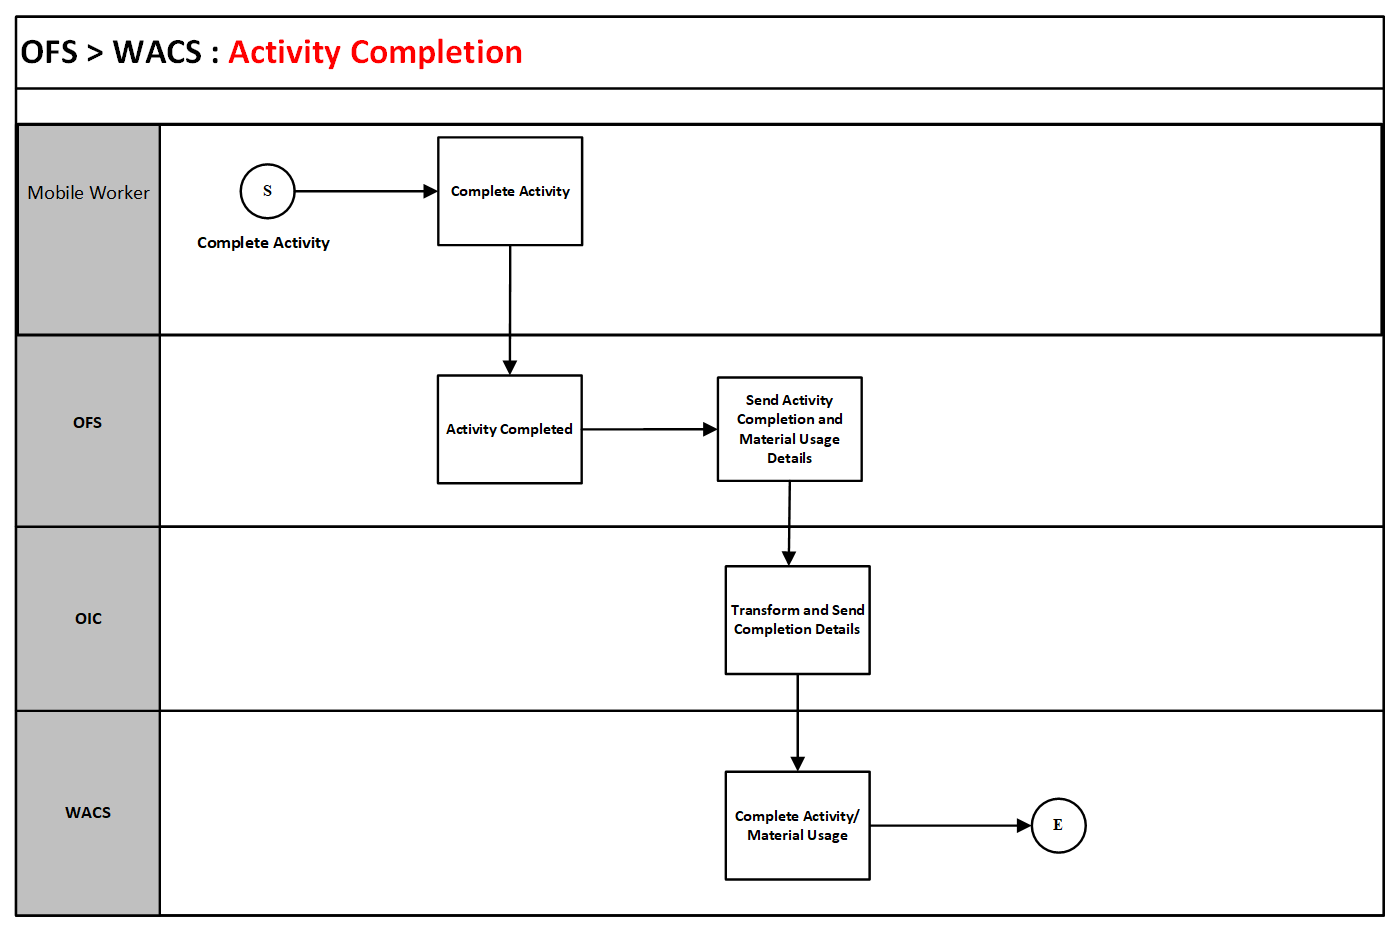 A graphical representation of the Activity Completion integration process.